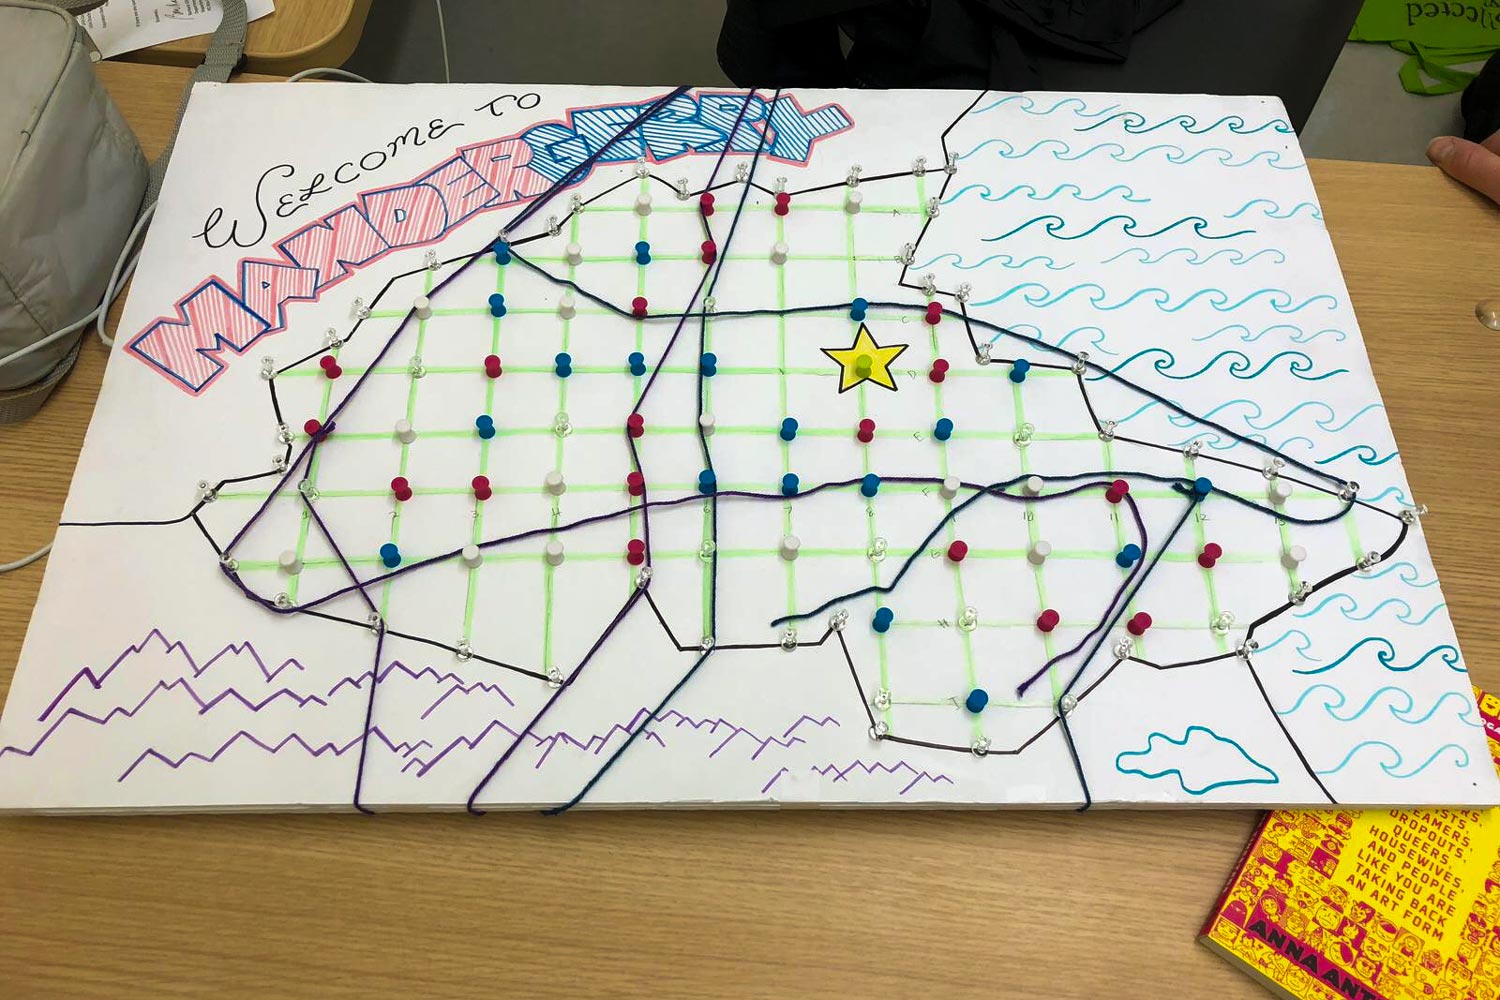 A prototype made by students Christian Baumgardner, Clara Doley, Eve Fidler, Quinn Lyerly and Jake Vanaman has players engage in gerrymandering.